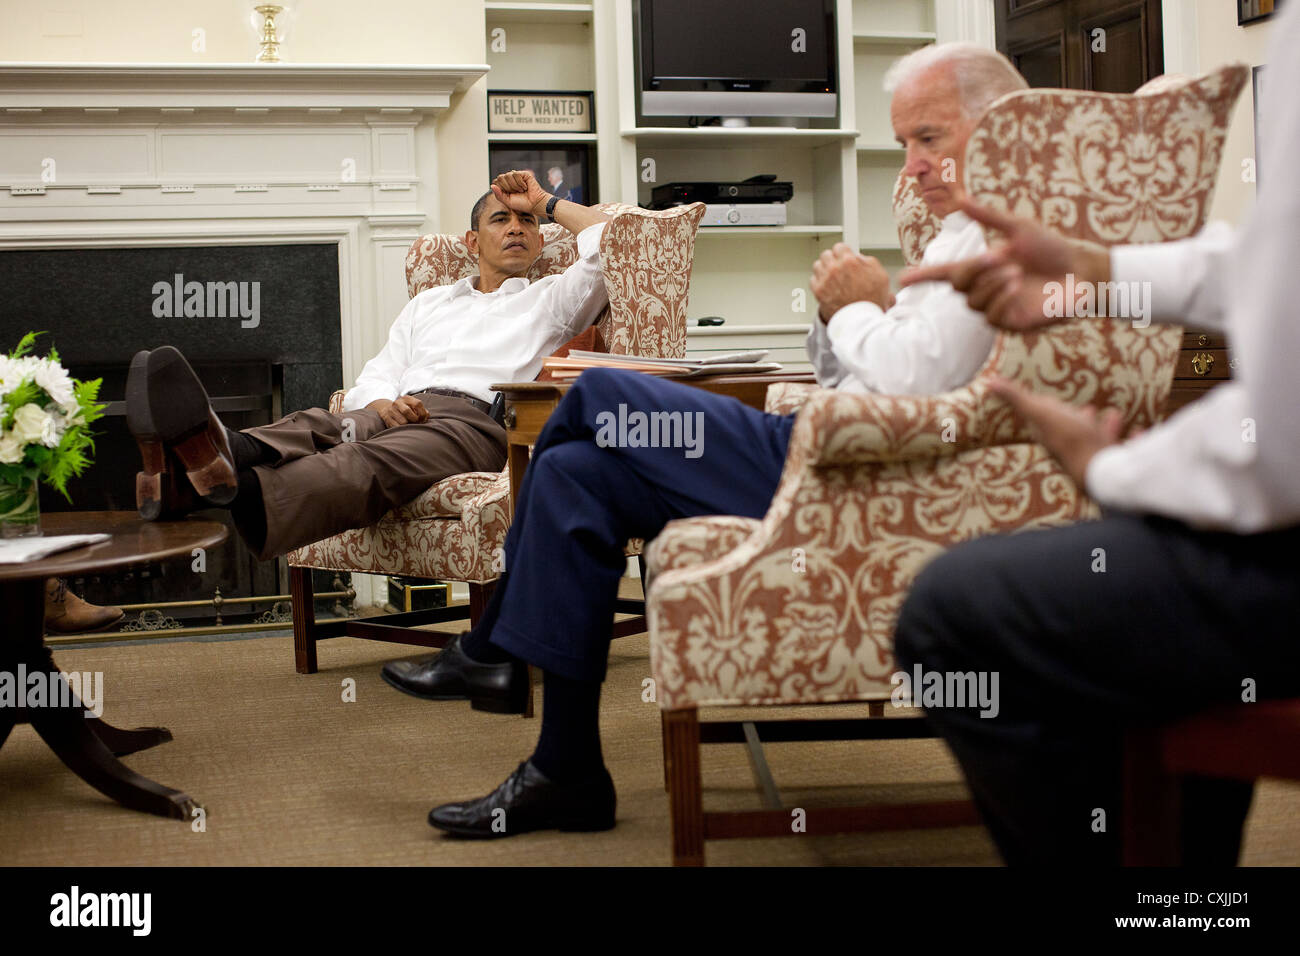 US President Barack Obama and Vice President Joe Biden are briefed by Rob Nabors, Assistant to the President for Legislative Affairs July 30, 2011 during a meeting in Chief of Staff Bill Daley's West Wing office at the White House to discuss ongoing efforts to find a balanced approach to the debt limit and deficit reduction. Stock Photo